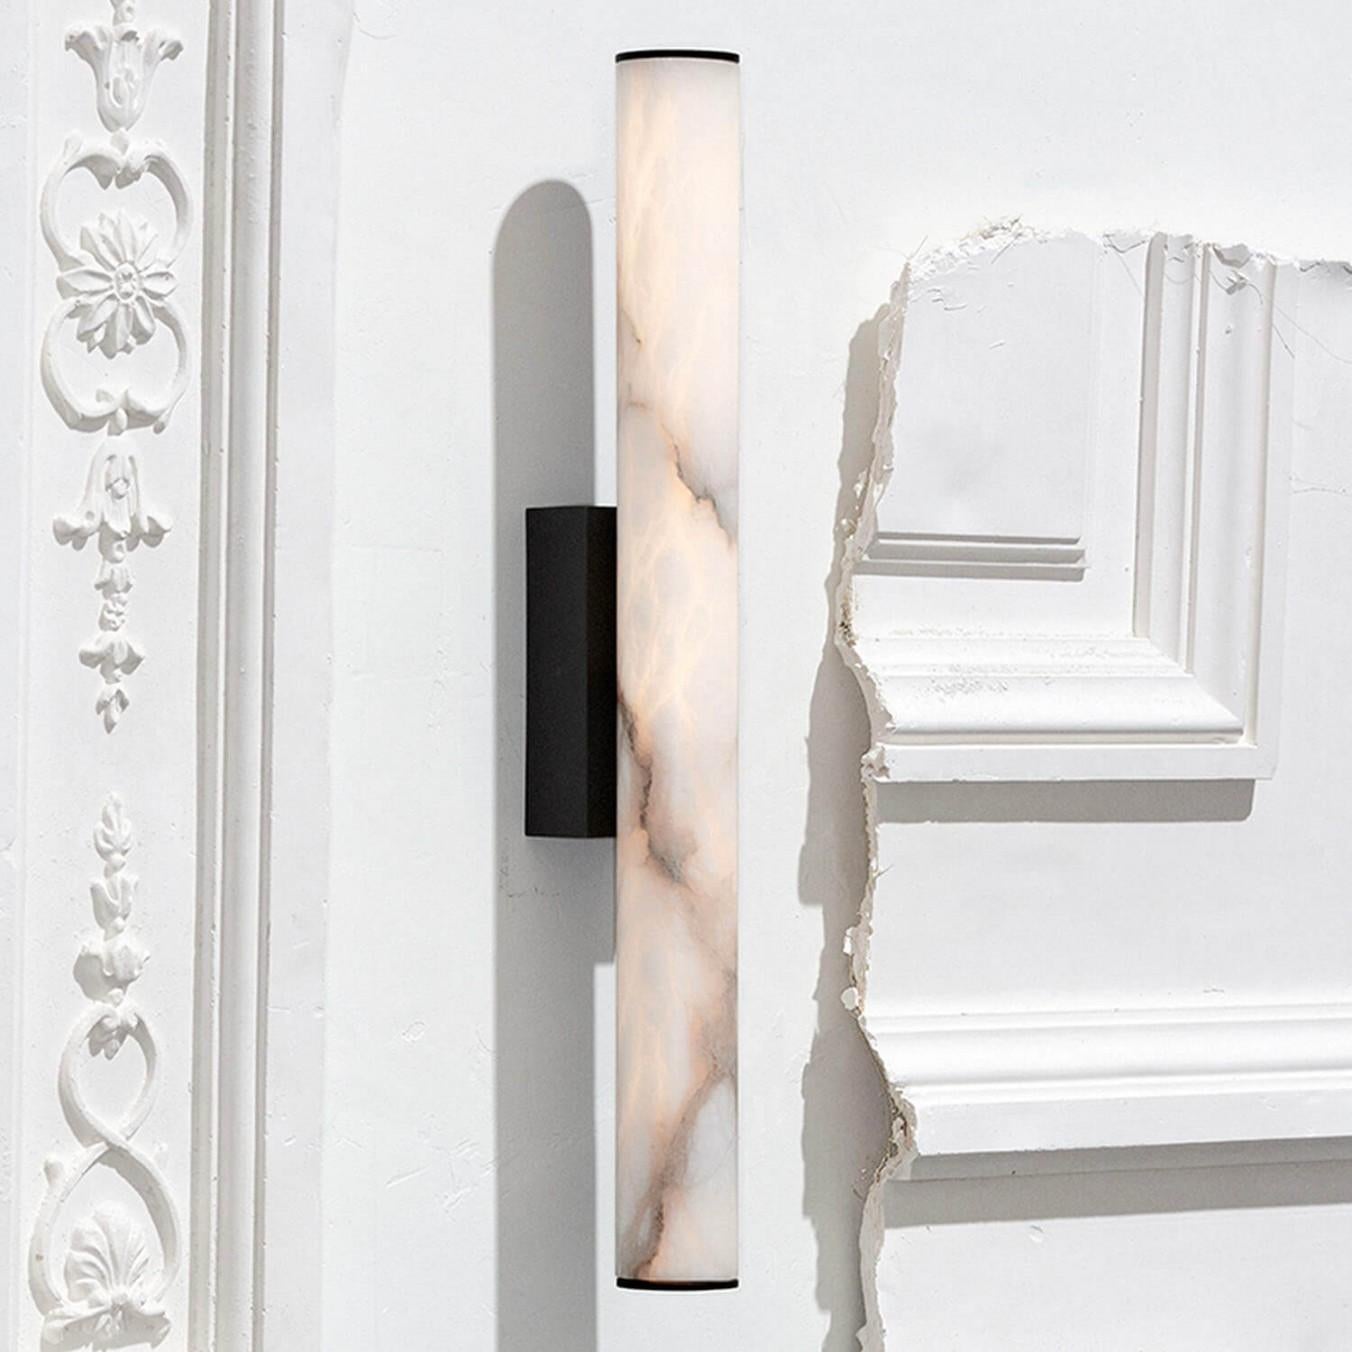 Contemporary Alabaster and brass wall sconce - Callisto by Garnier&Linker

Result from a research on cylindrical shape, CALLISTO collection seeks to highlight alabaster inside the most minimal brass structure. 

Available in glass version under the